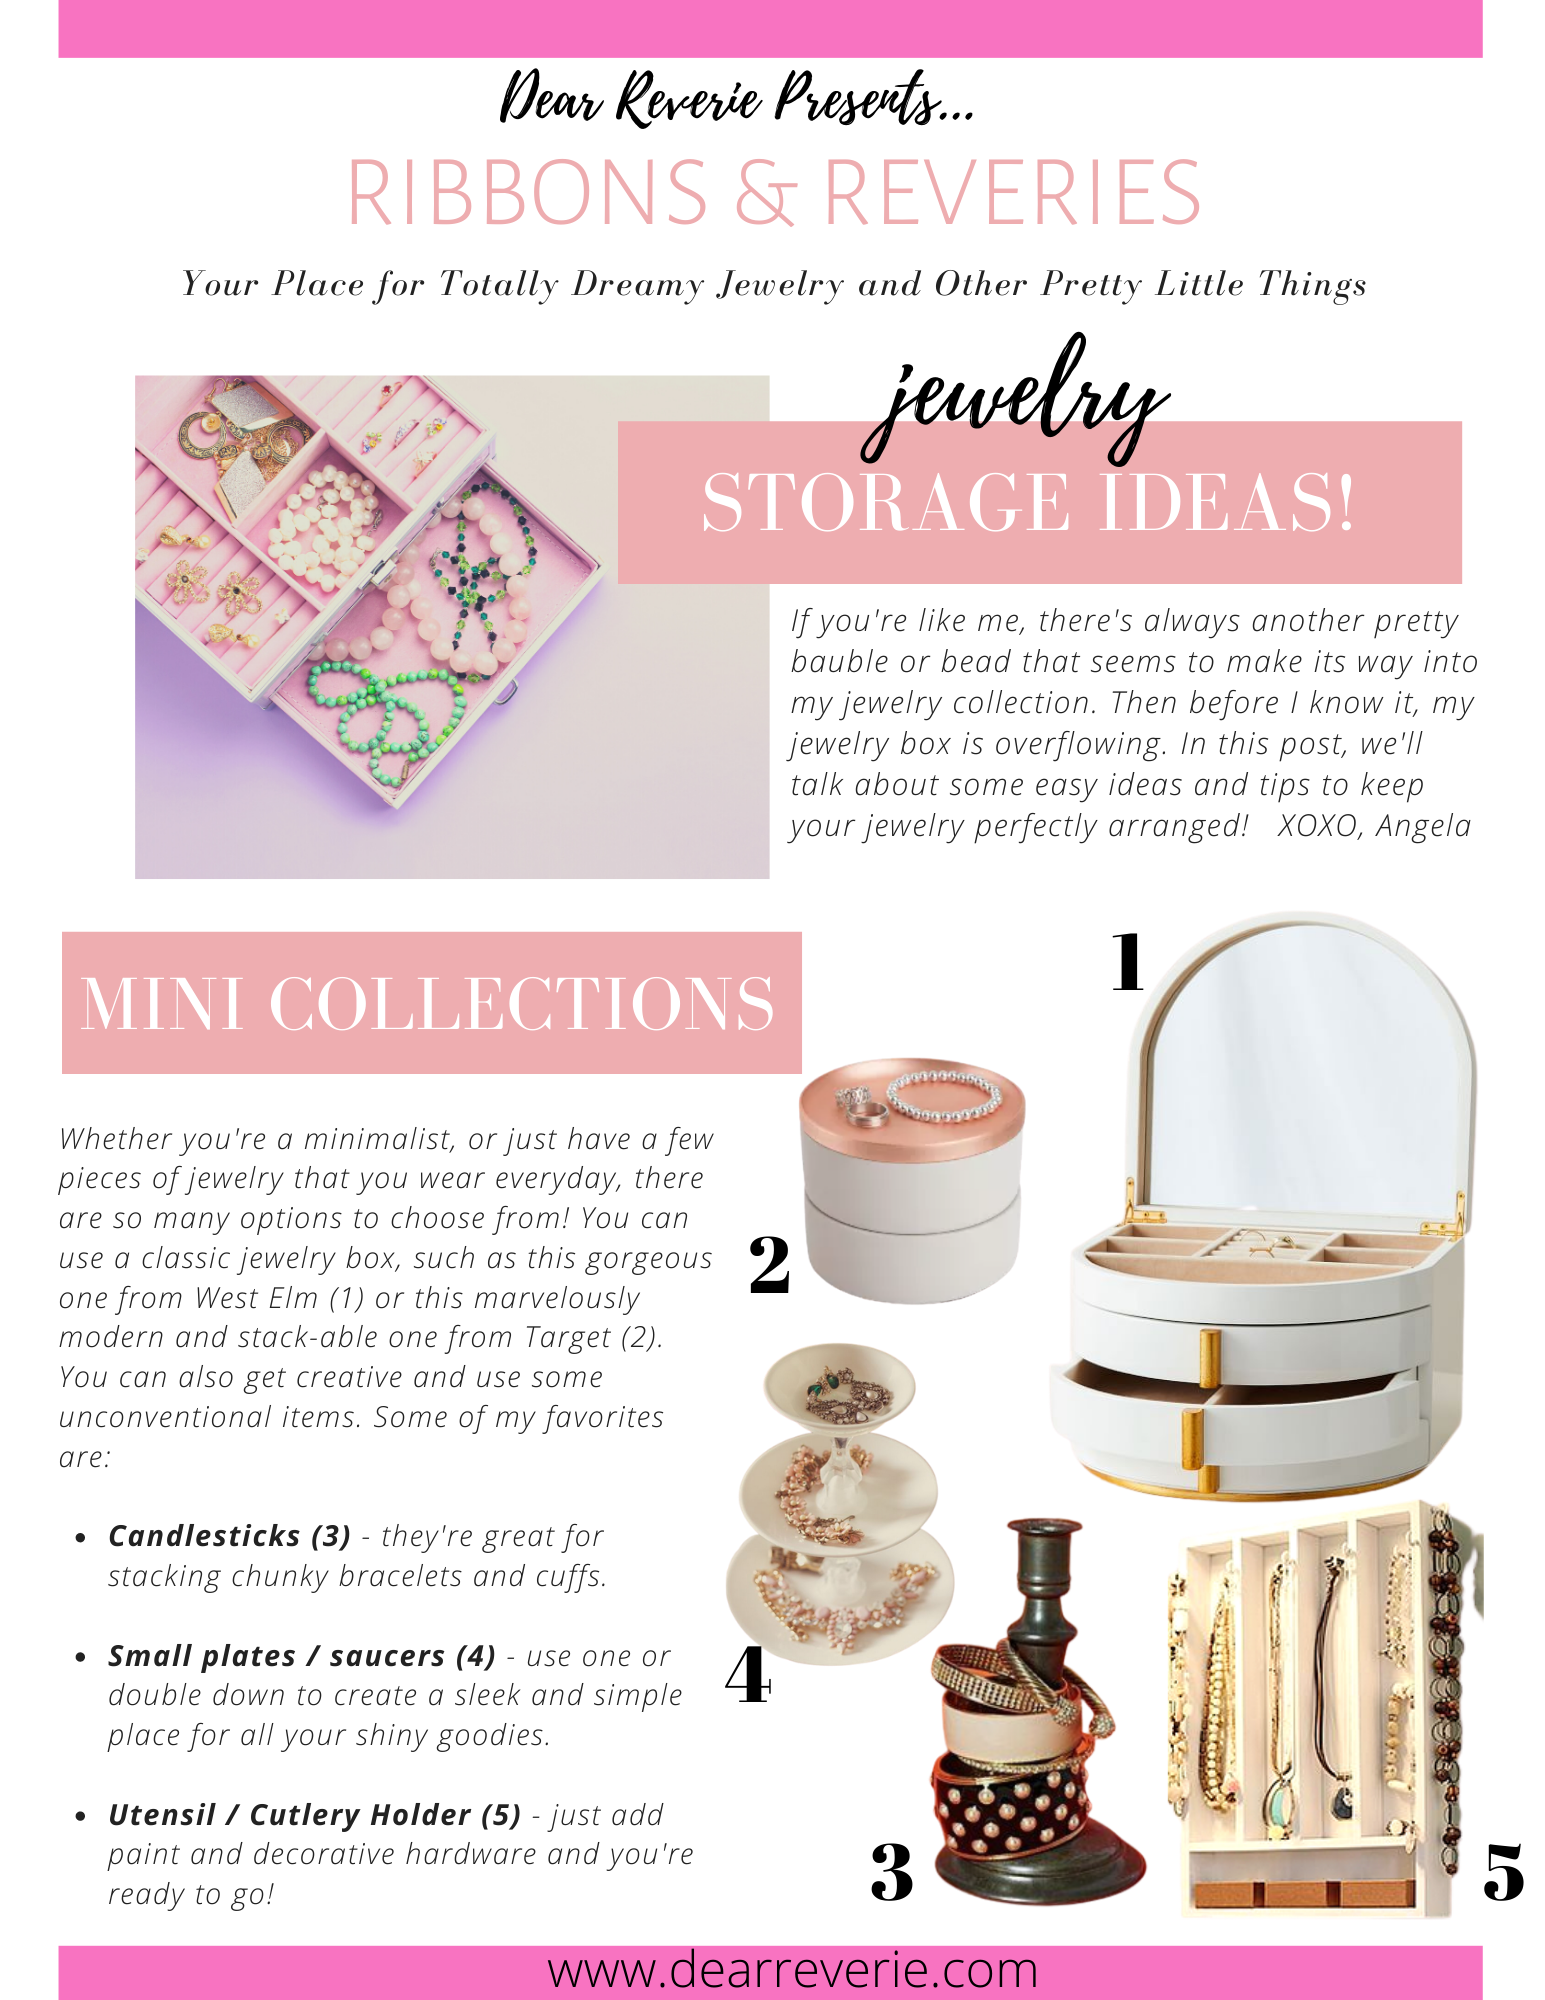 Practical Jewelry Storage Solutions — WE MOVED! Visit ashleyburk.com